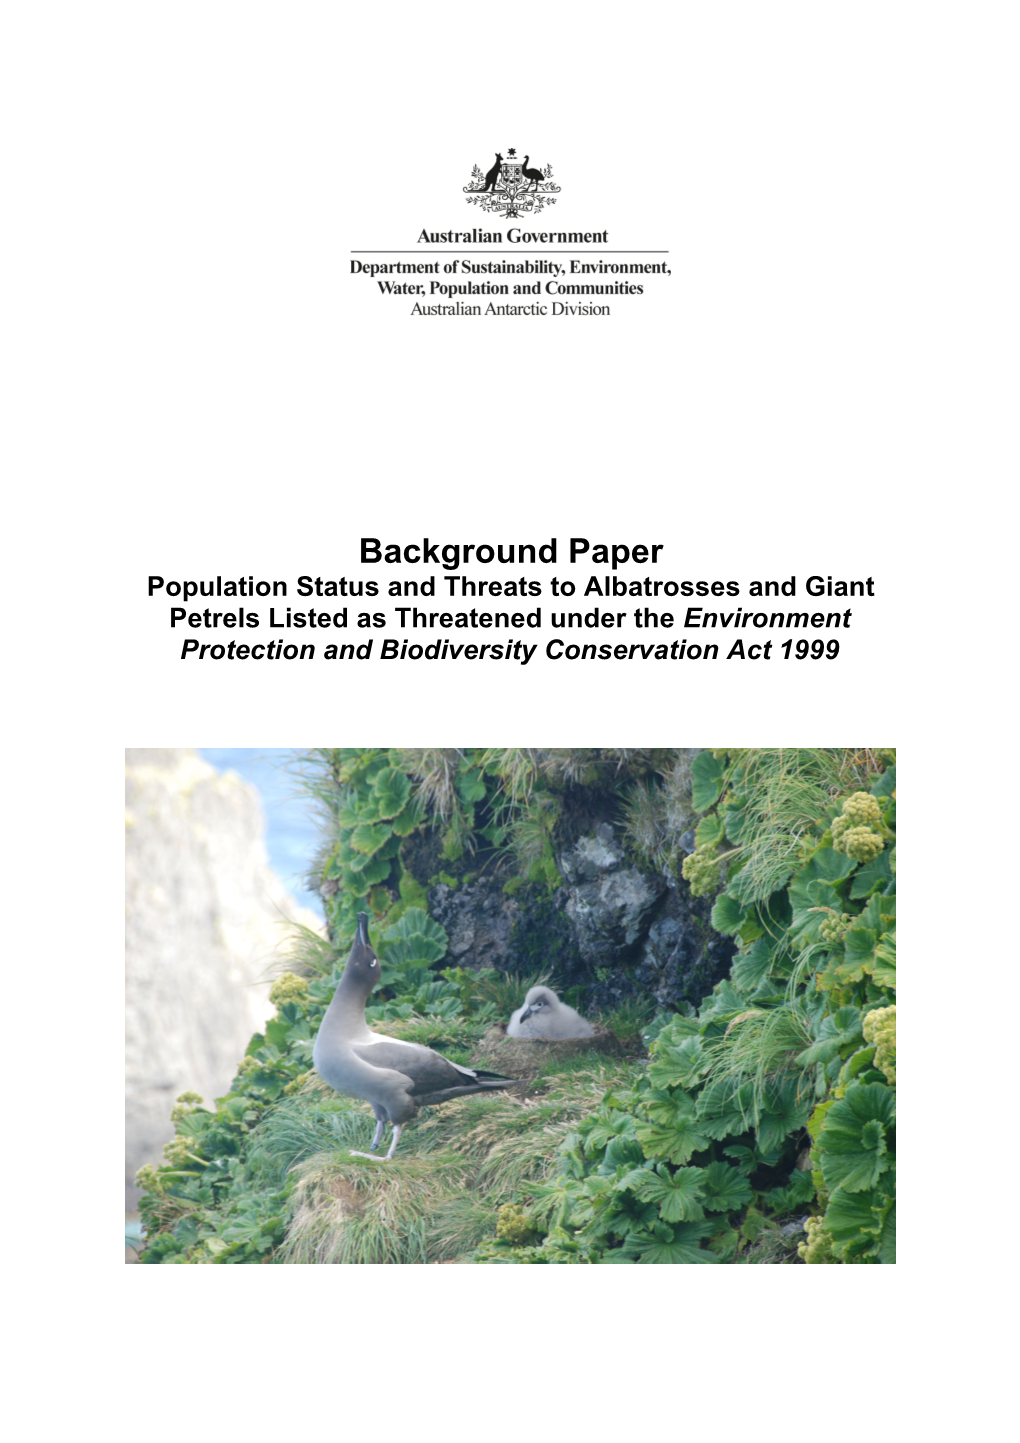 Background Paper, Population Status and Threats to Albatrosses and Giant Petrels Listed